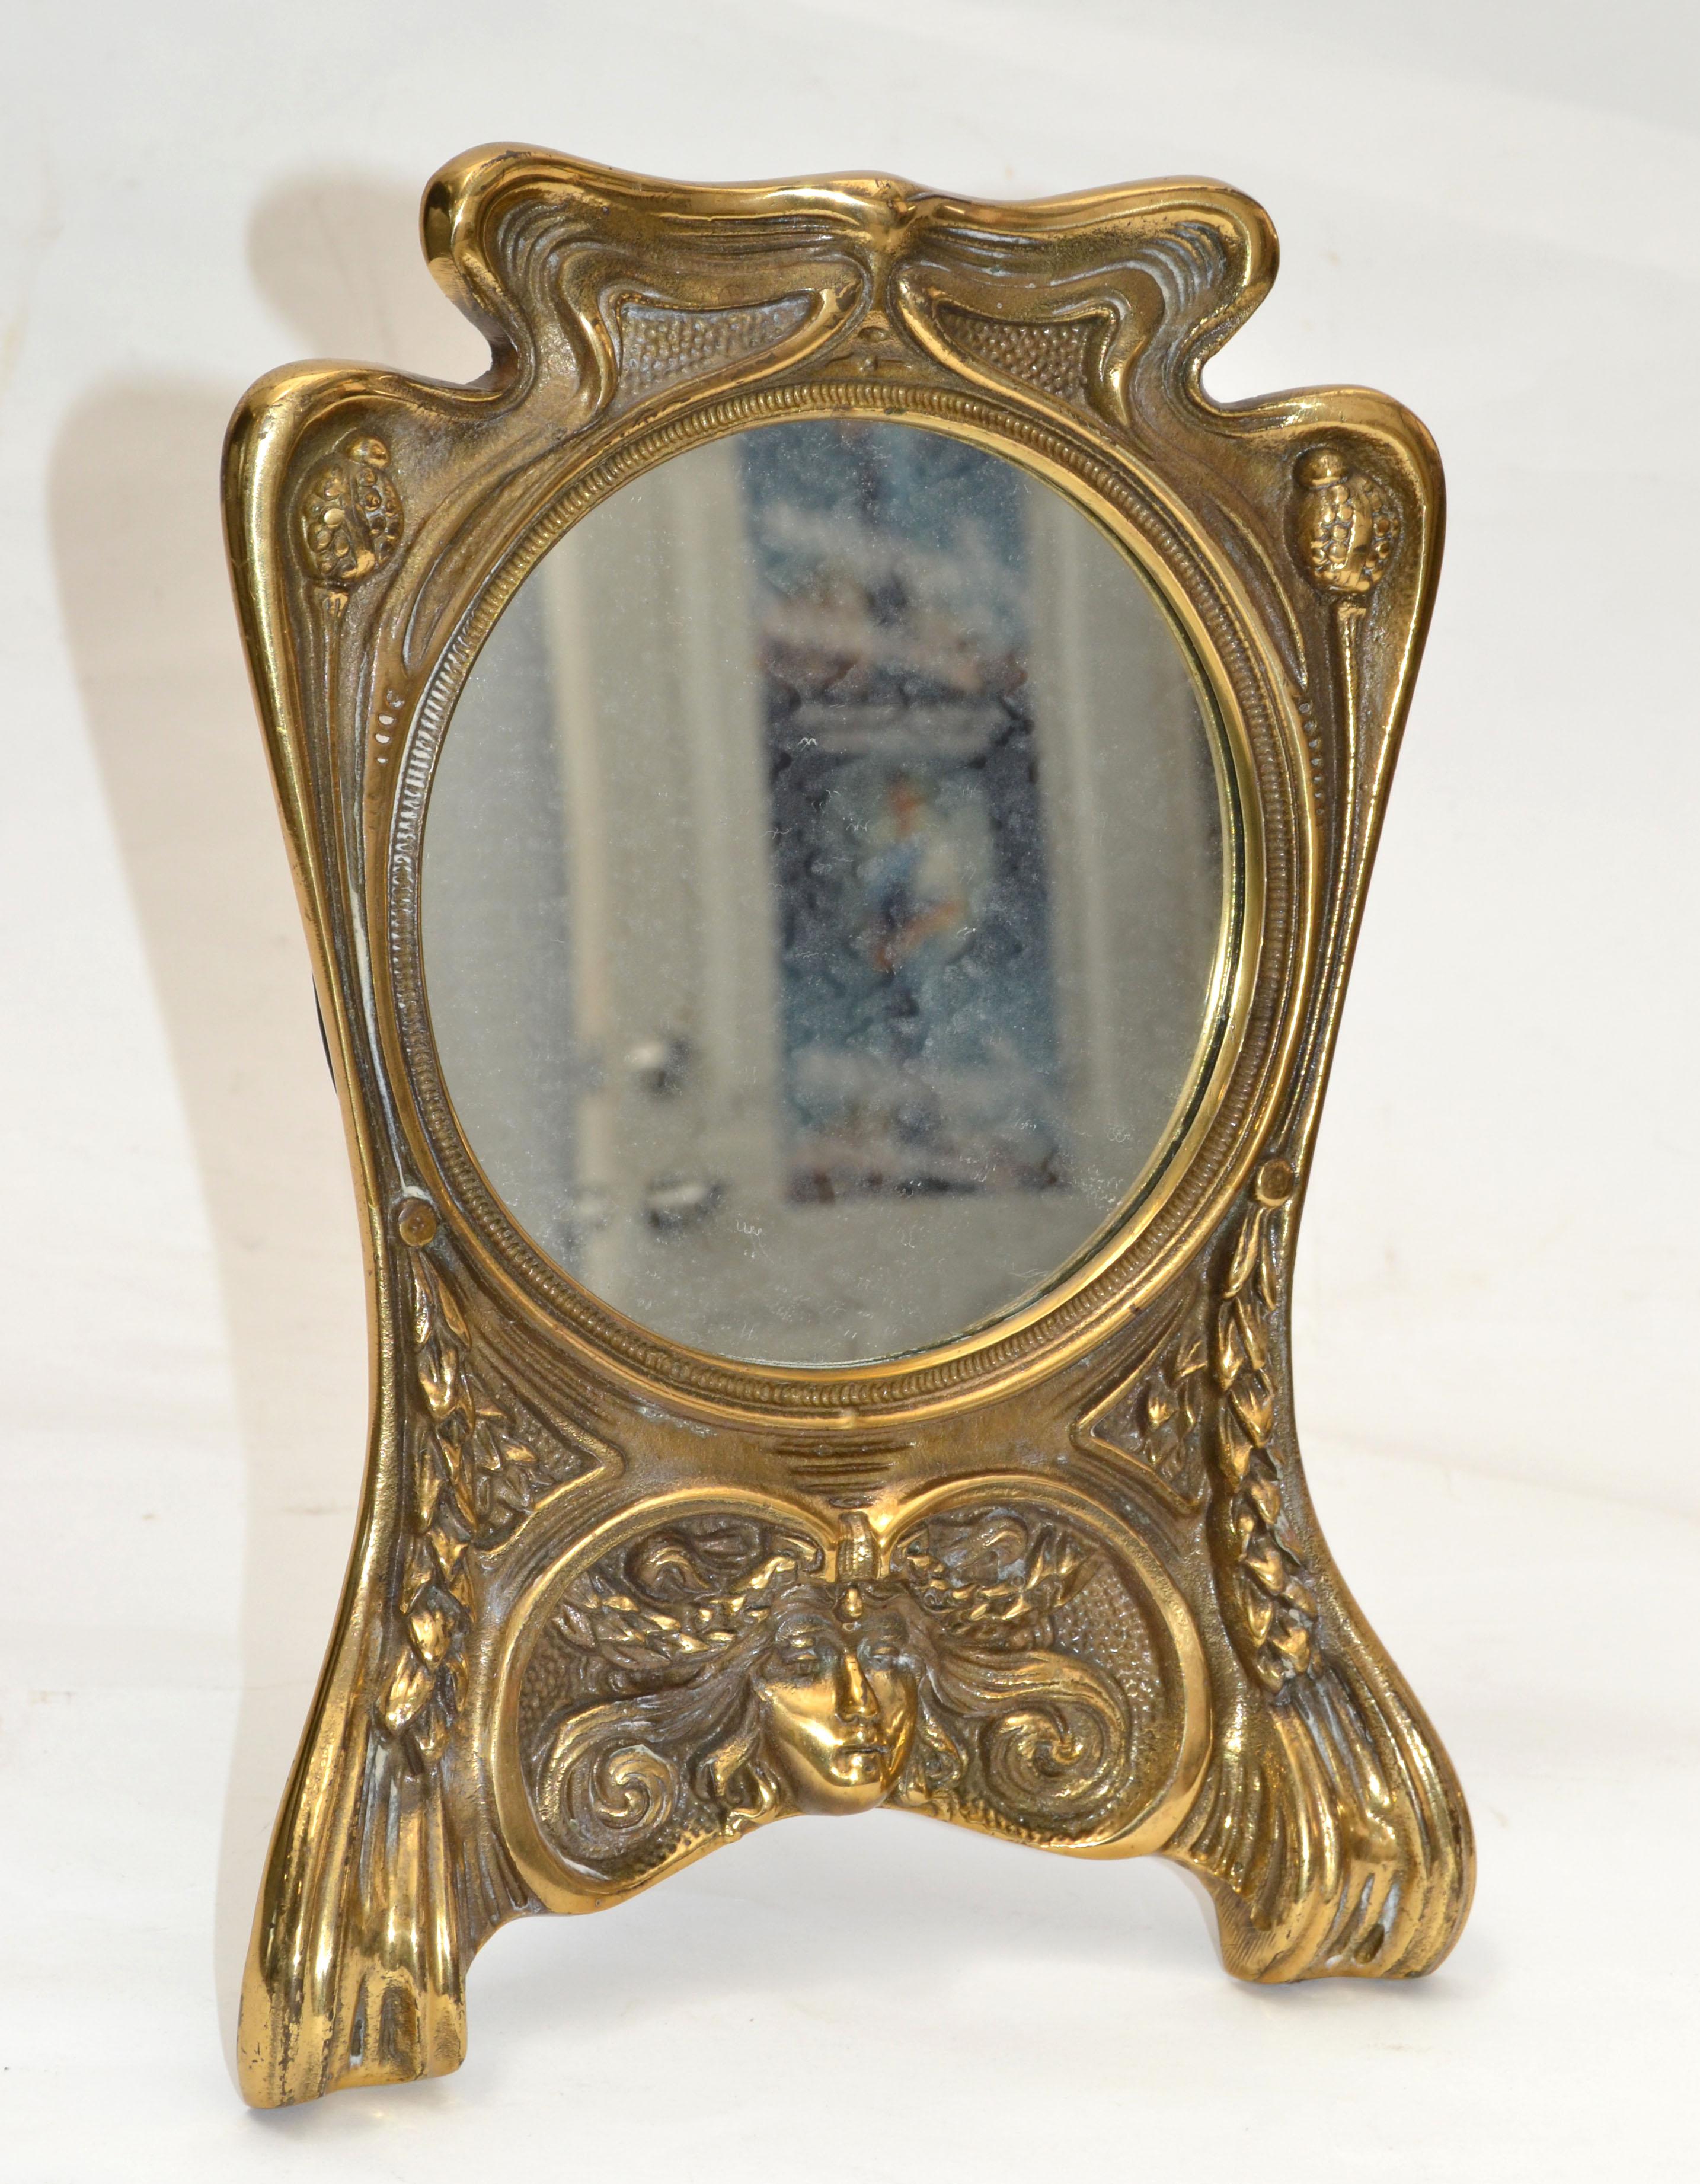 Art Nouveau whimsical handcrafted cast bronze table or vanity mirror.
Mirror size: 5.25 inches diameter.